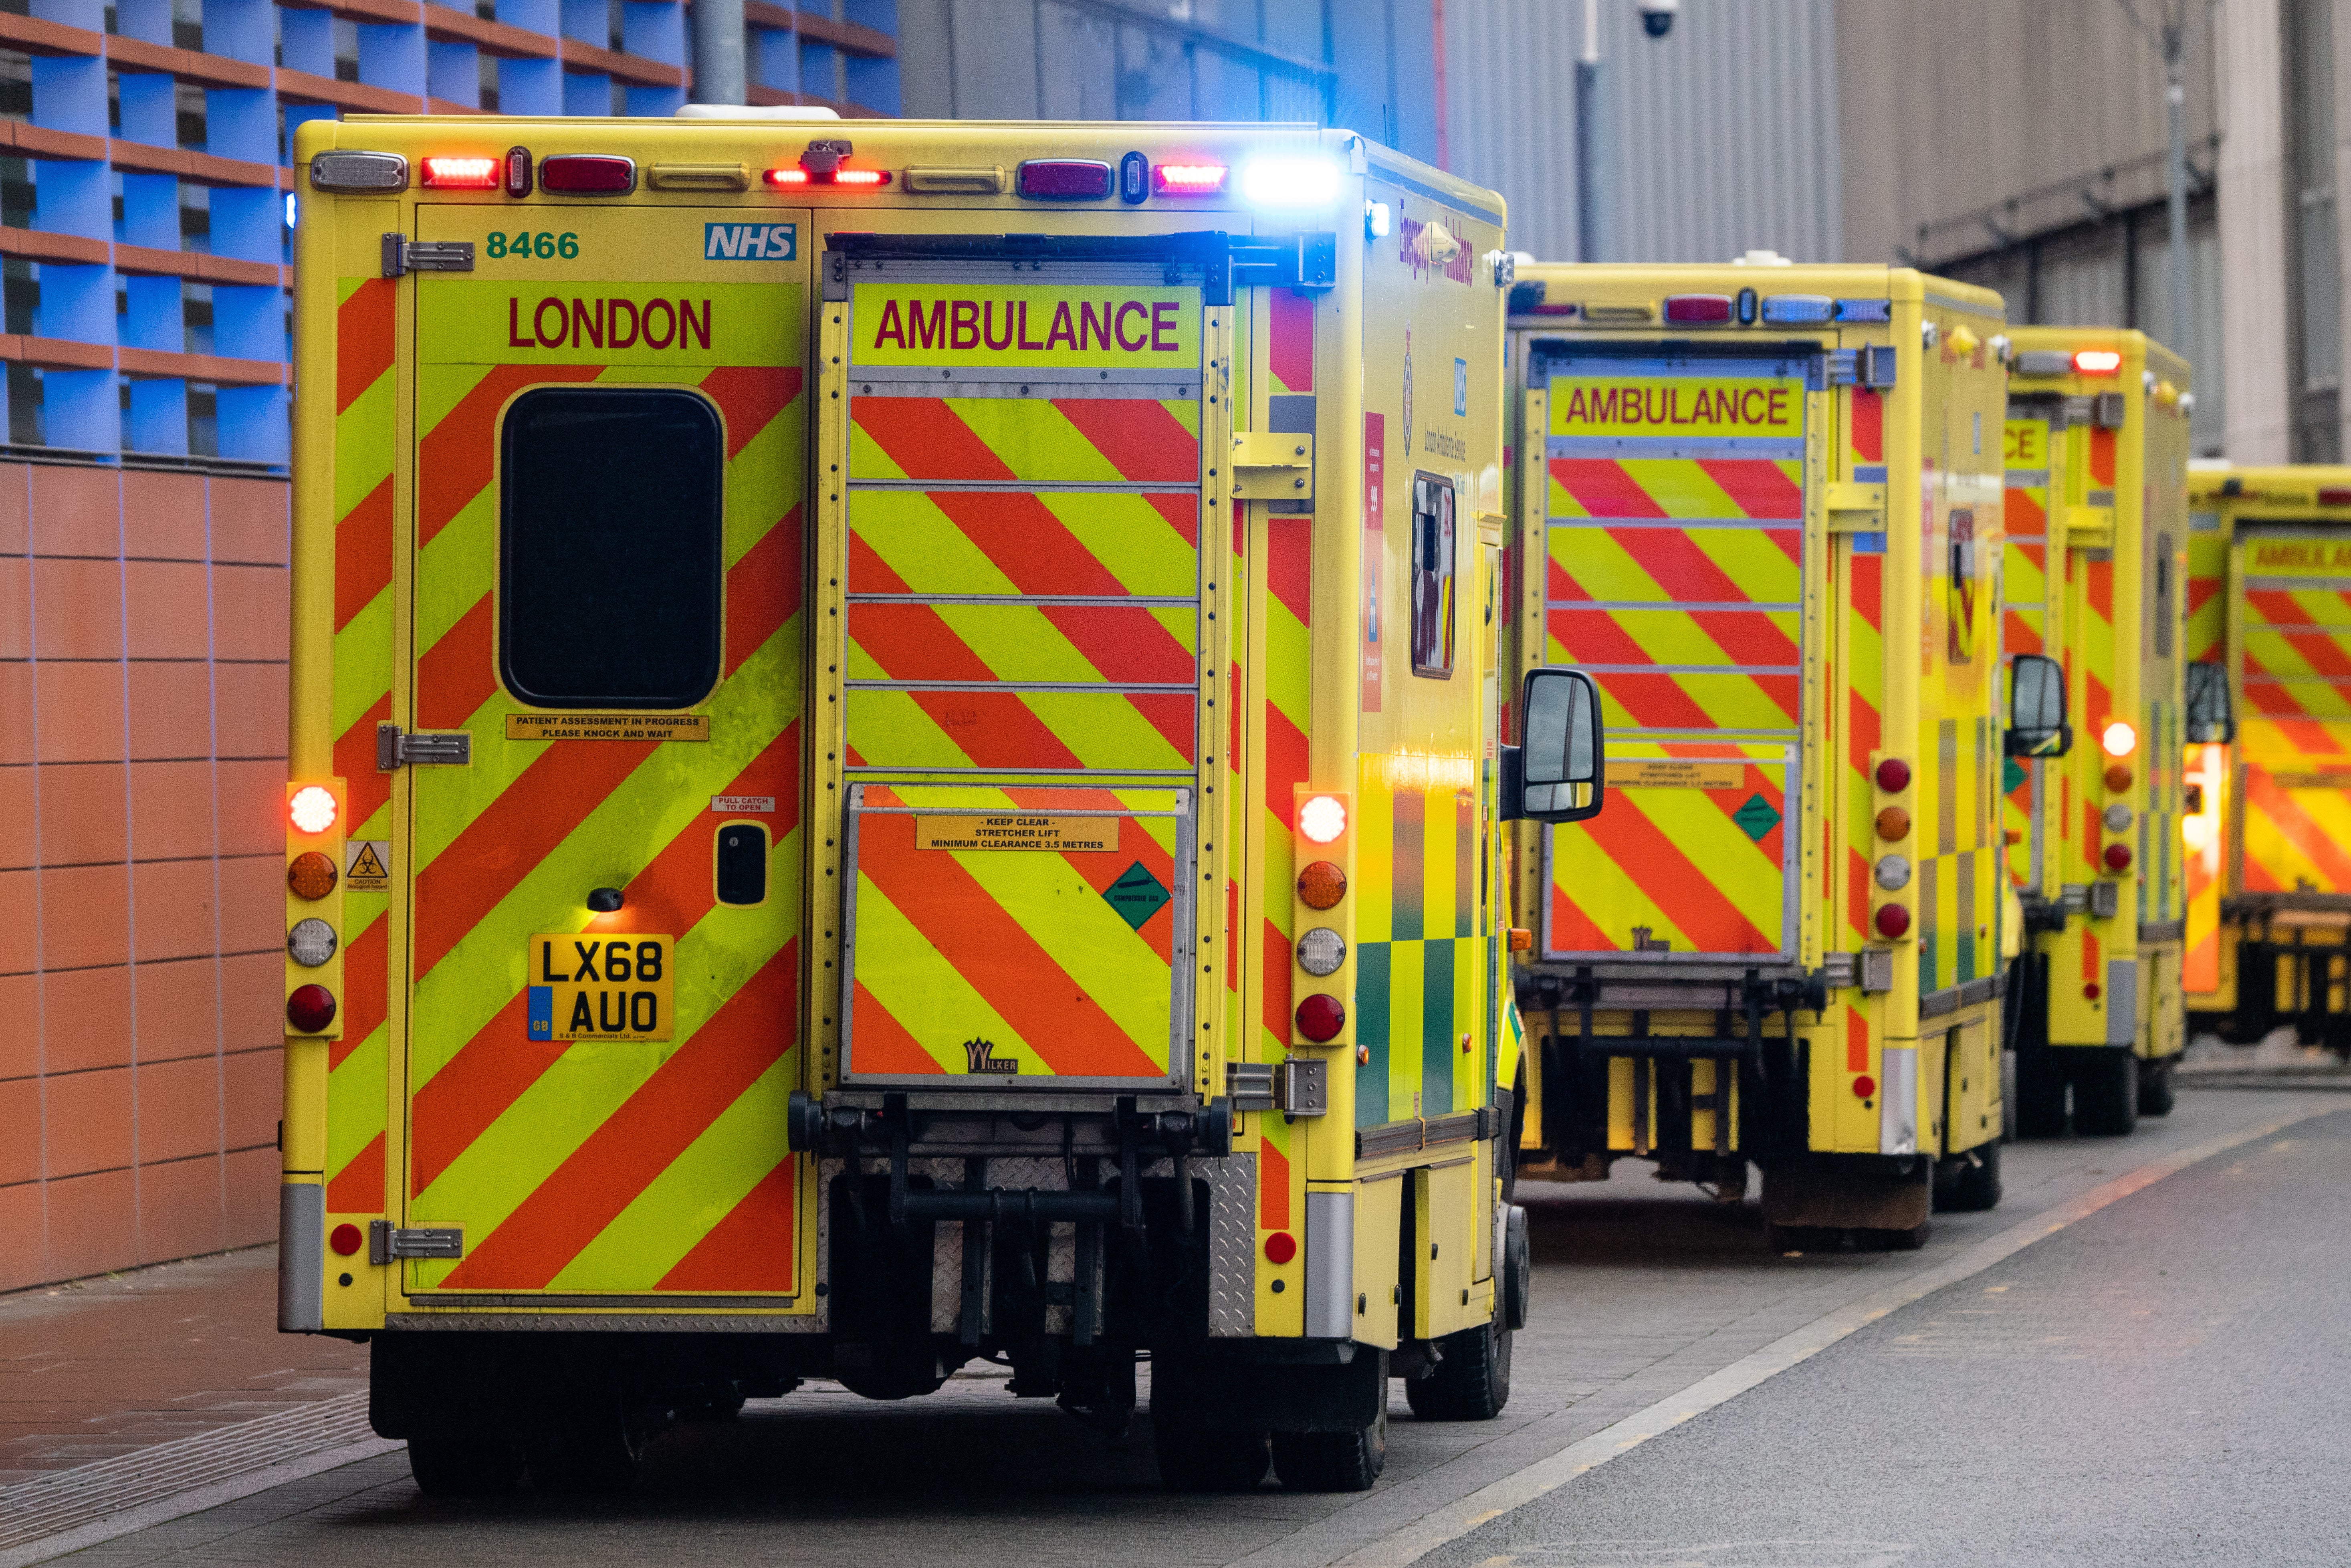 The London Ambulance Service Trust was down by almost 100 ambulances on Thursday evening and Friday due to staff sickness